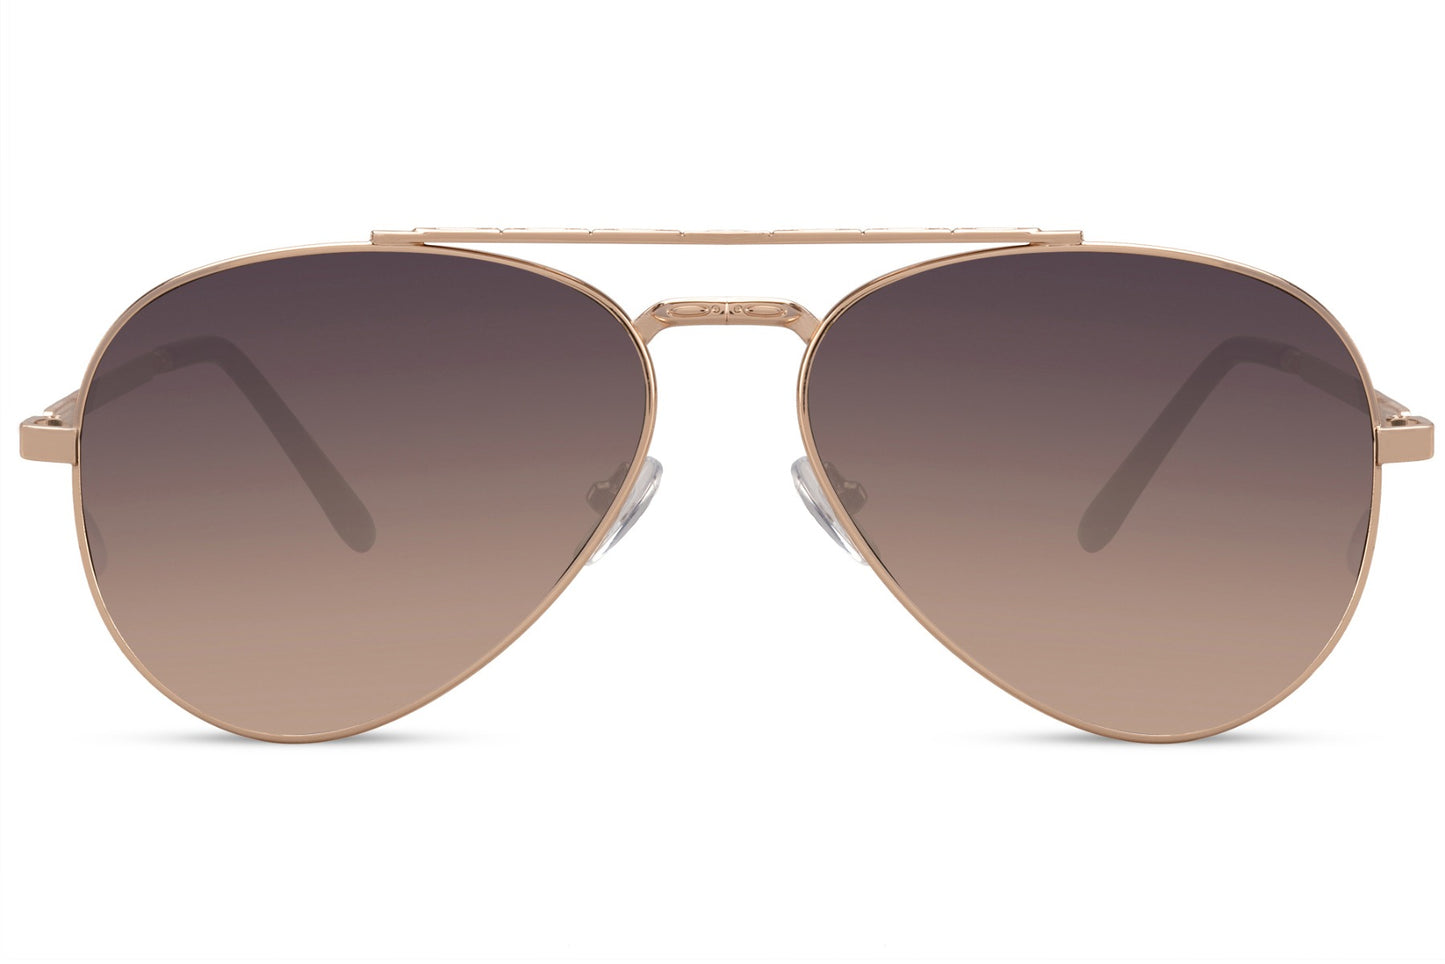 Vintage-Inspired Aviator Sunglasses Collection